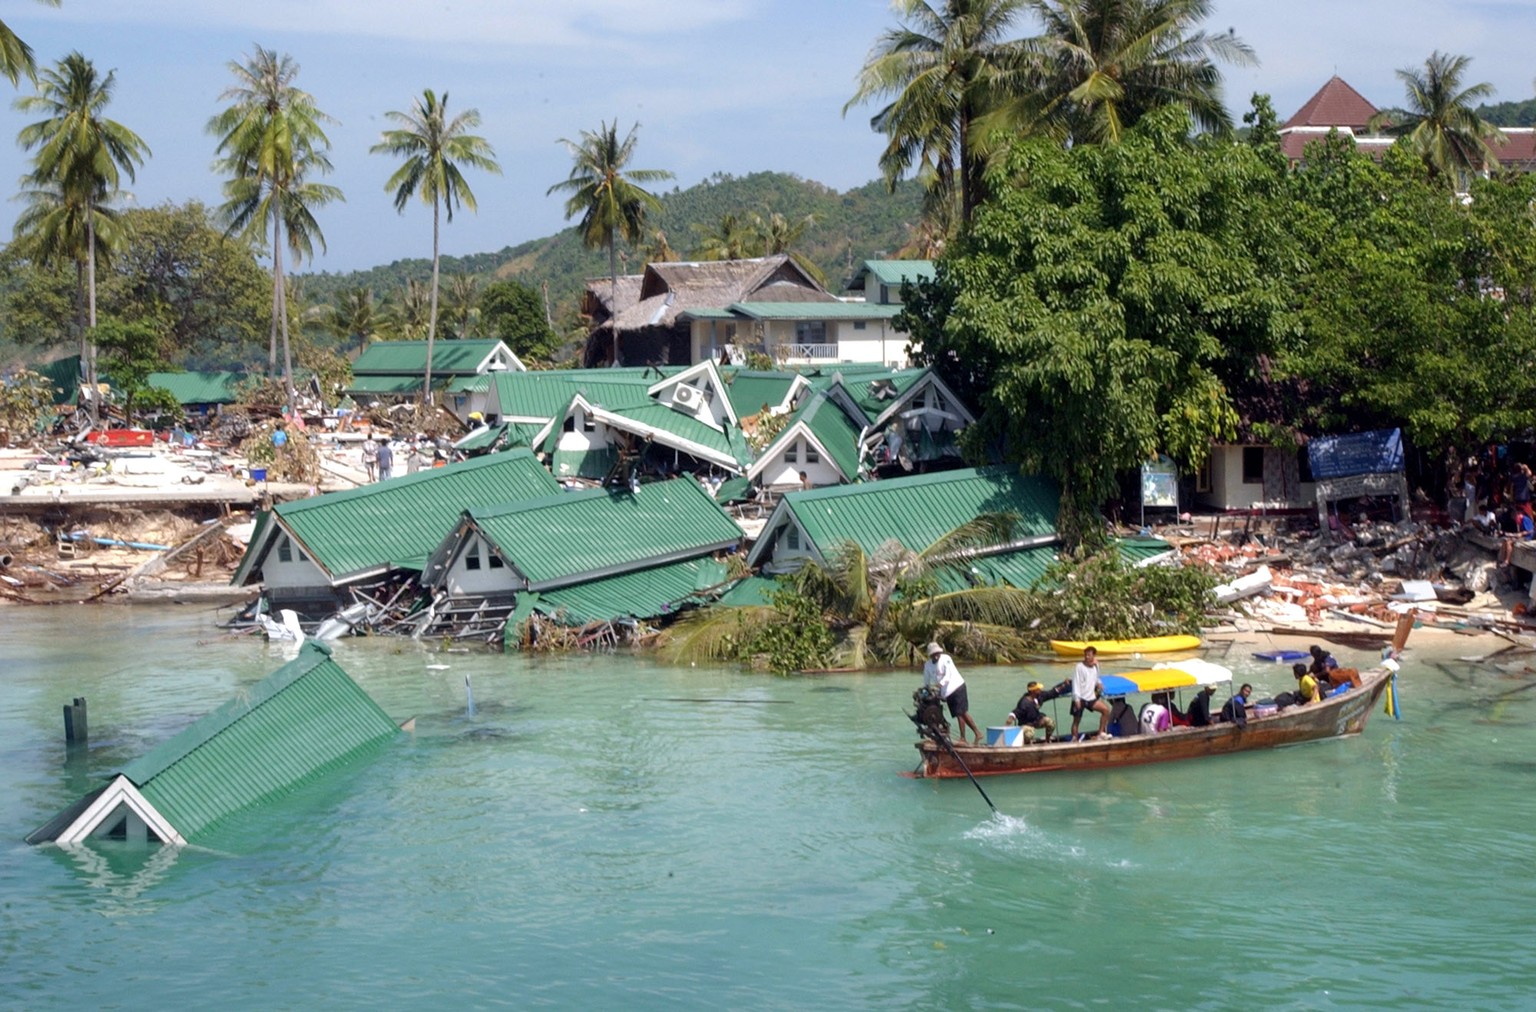 FILE - In this Dec. 28, 2004 file photo, a boat passes by a damaged hotel, at Ton Sai Bay on Phi Phi Island, in Thailand. Friday marks the 10th anniversary of one of the deadliest natural disasters in ...